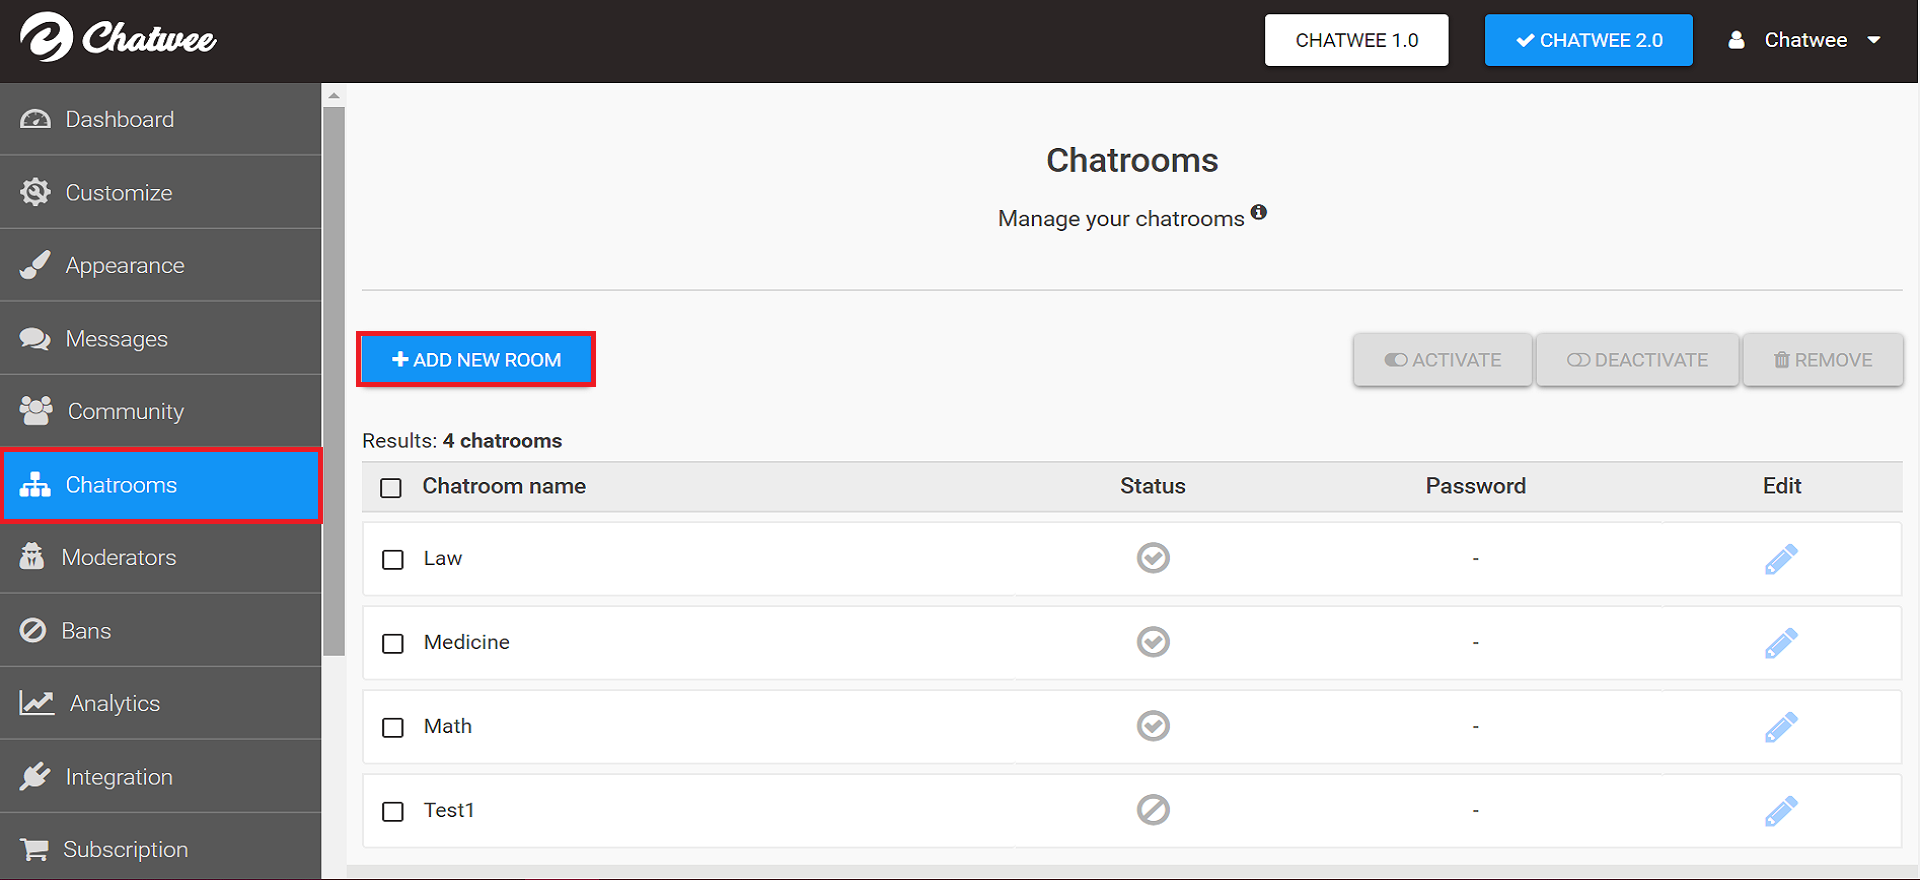 Chatroom handy Chatrooms